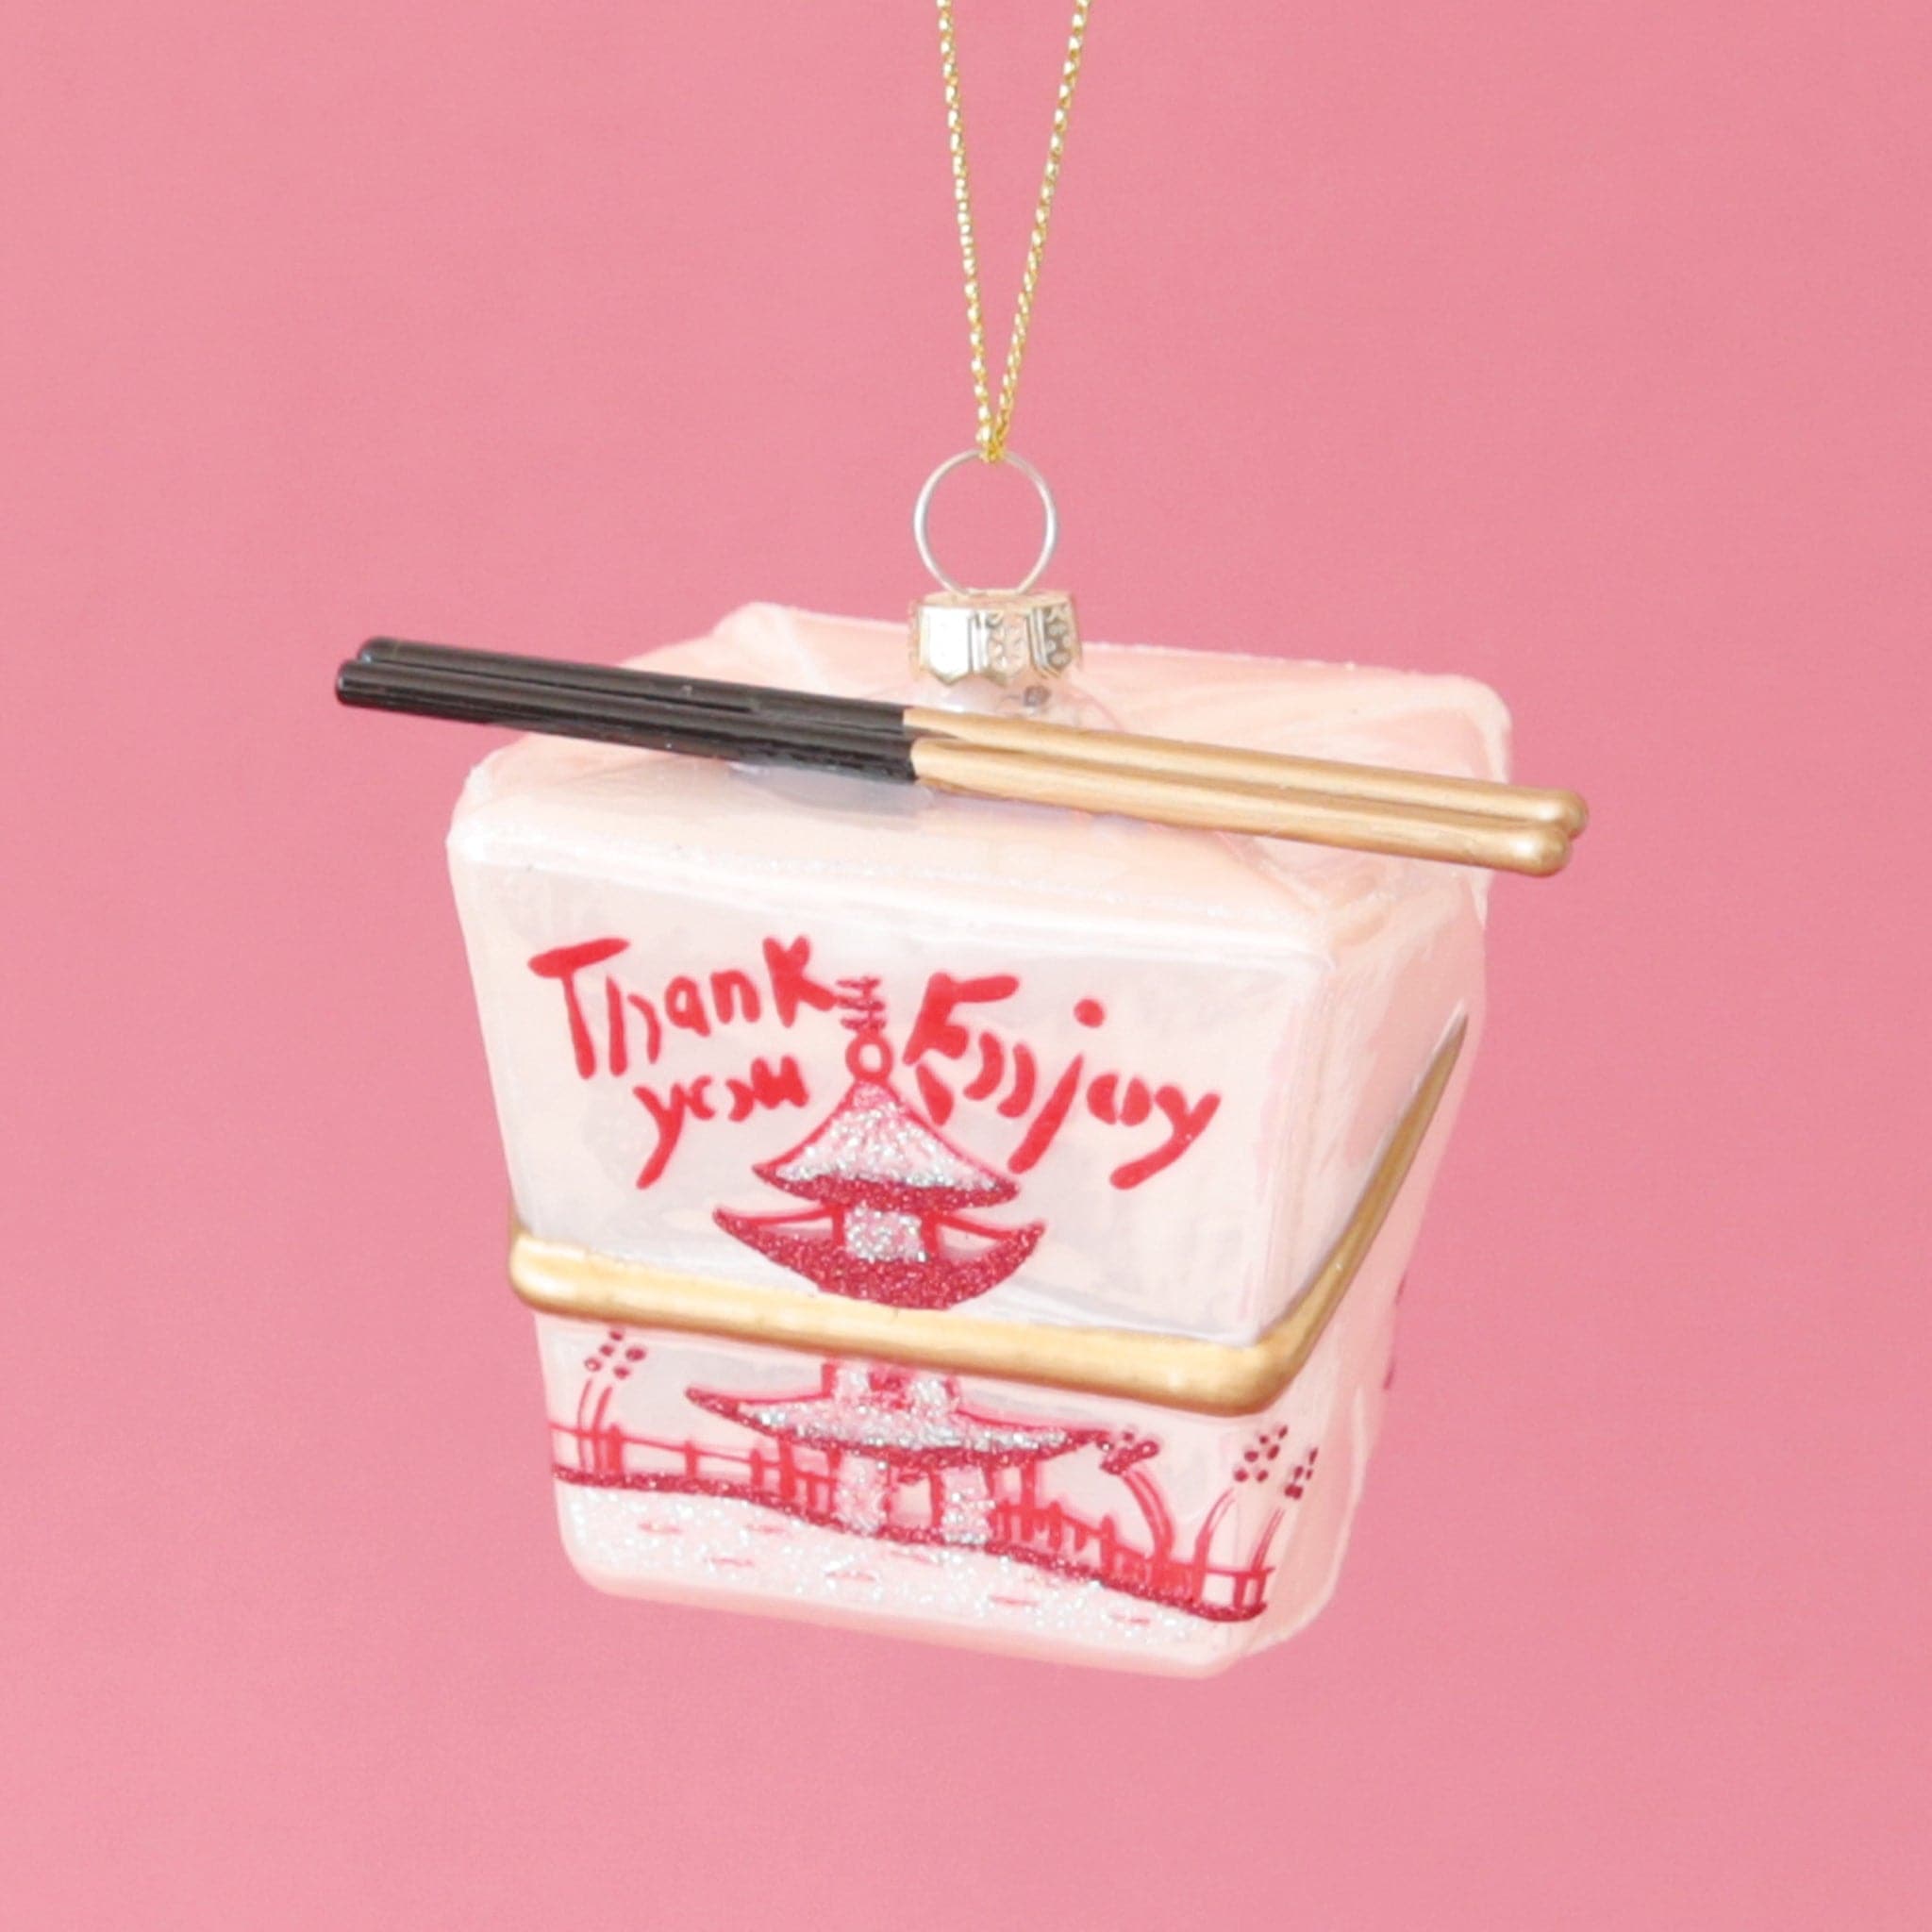 A glass ornament made to look like a pink Chinese takeout box with a pair of chopsticks across the top.